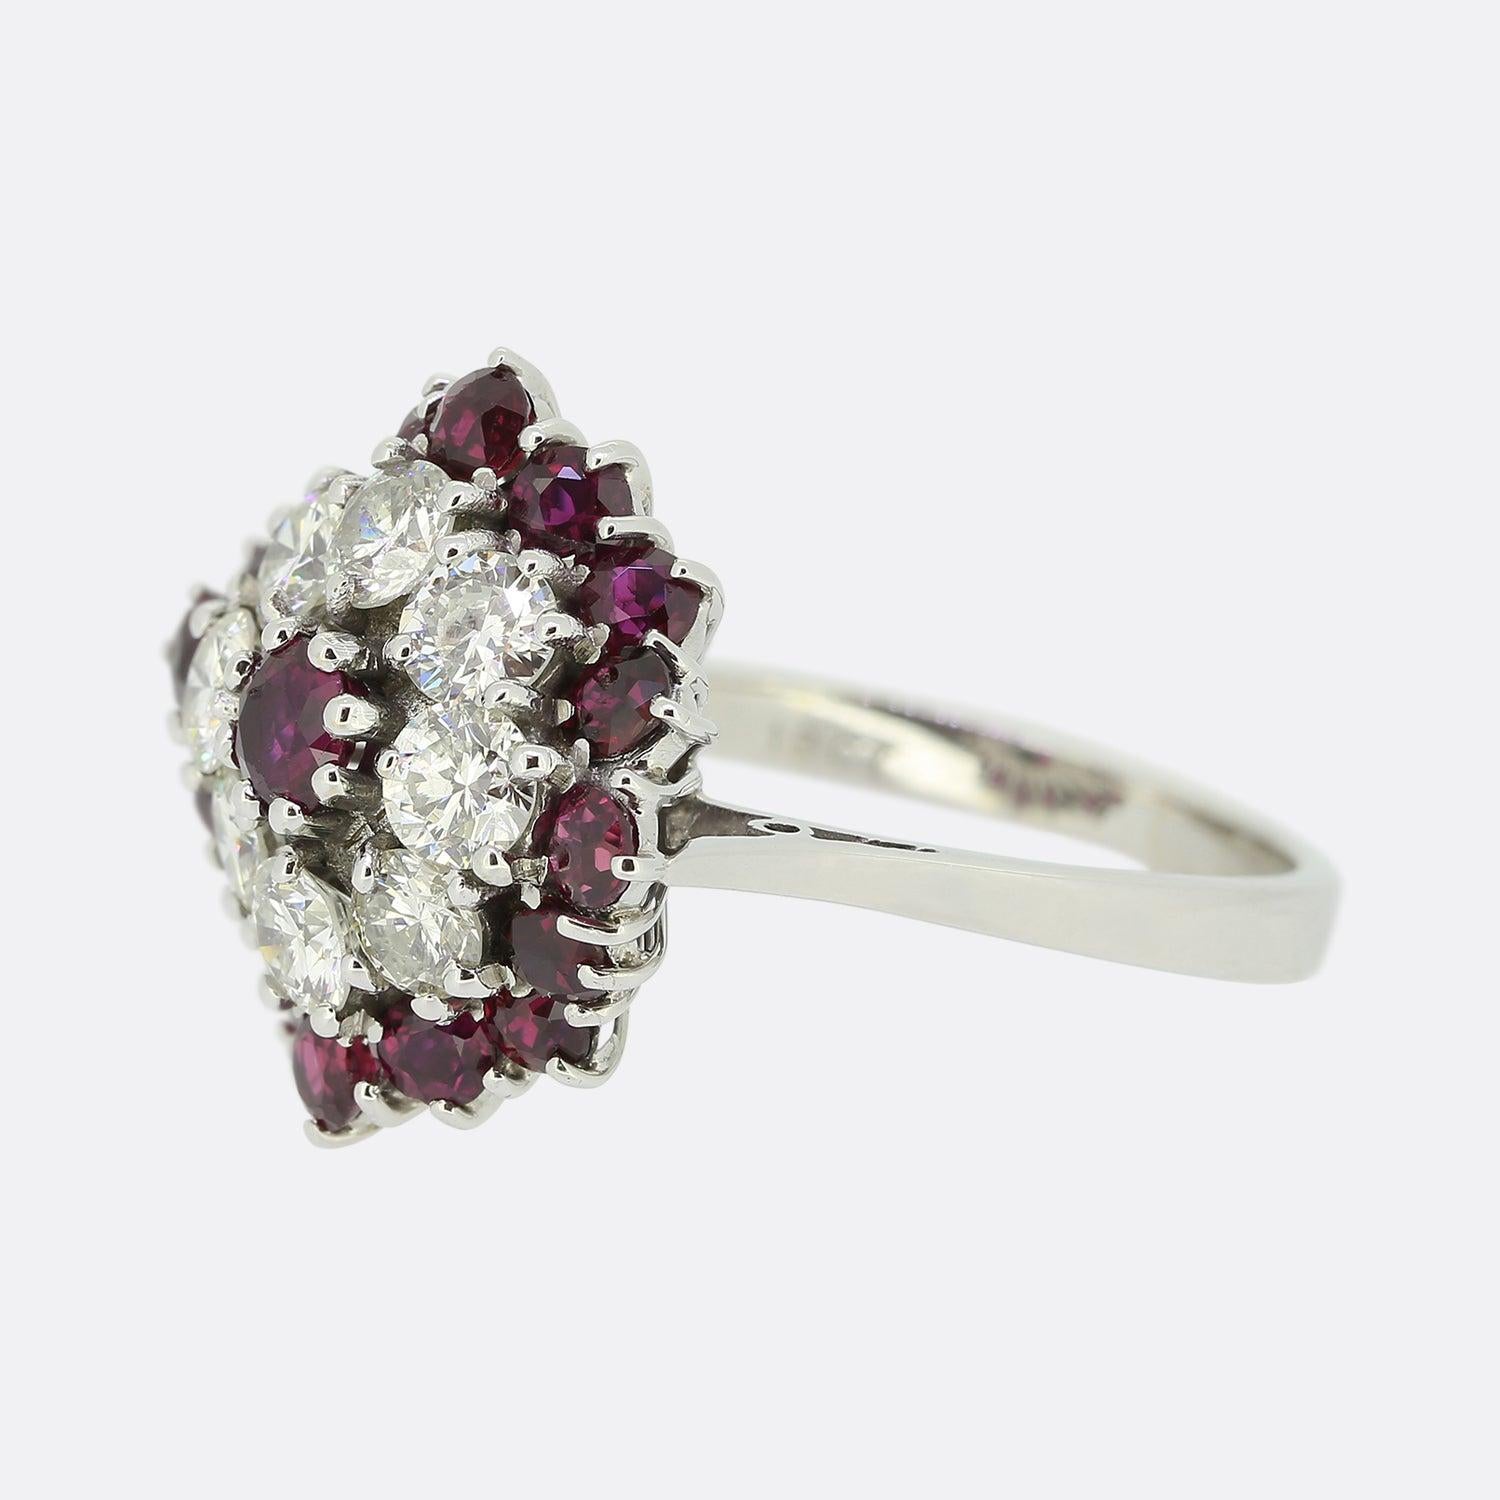 Here we have an excellently crafted dress ring showcasing a bold cluster of rubies and diamonds. Rendered in 18ct white gold, this piece features a single slightly risen ruby at the centre which is framed by, firstly, a circulating array of round